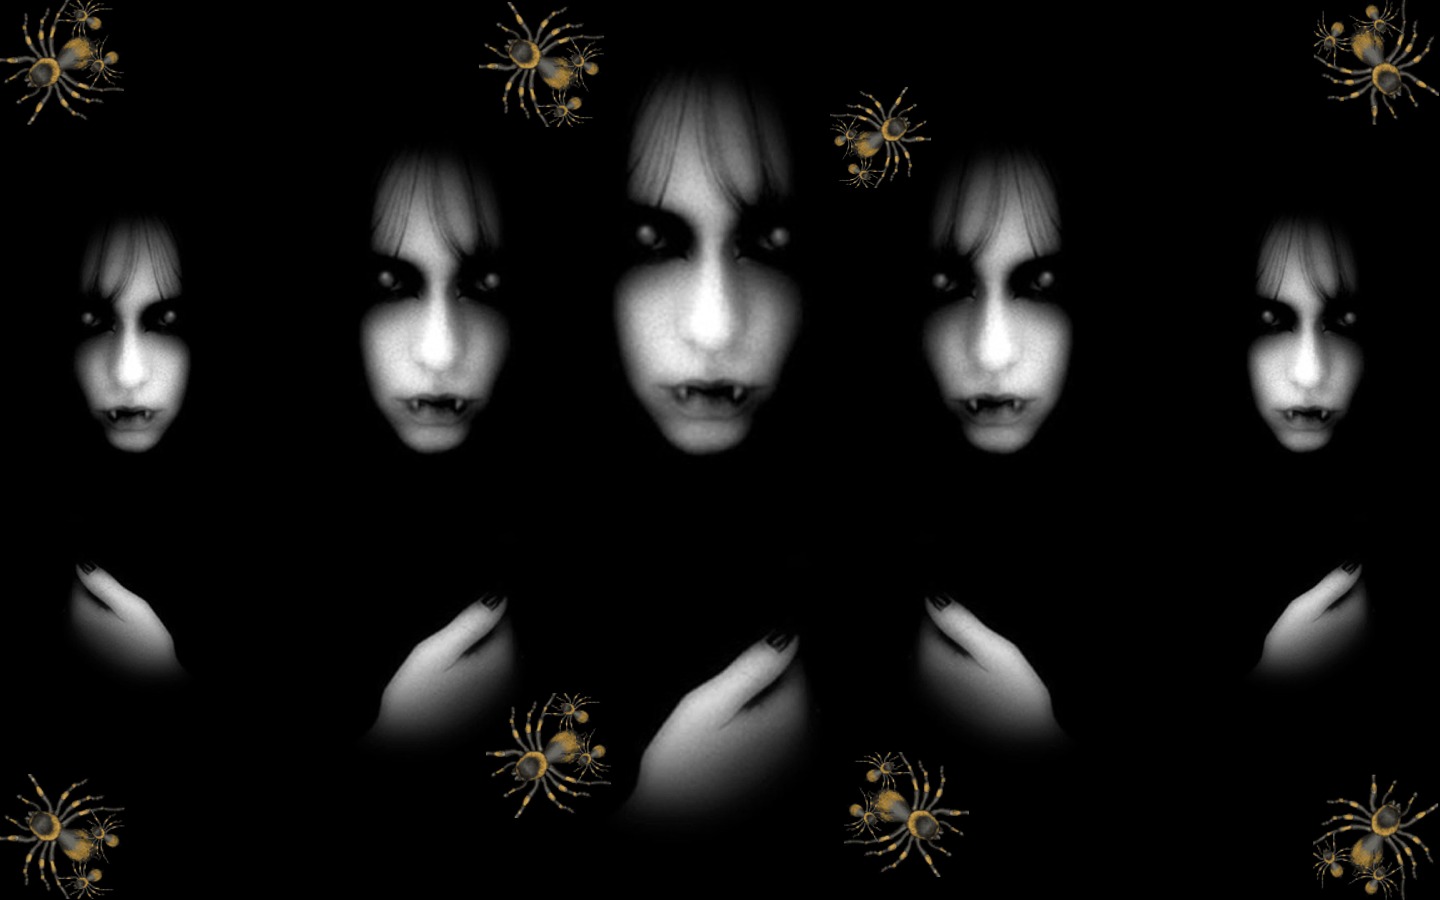 Vampire Wallpaper By Mardi S Funz Featuring The Dark Realm